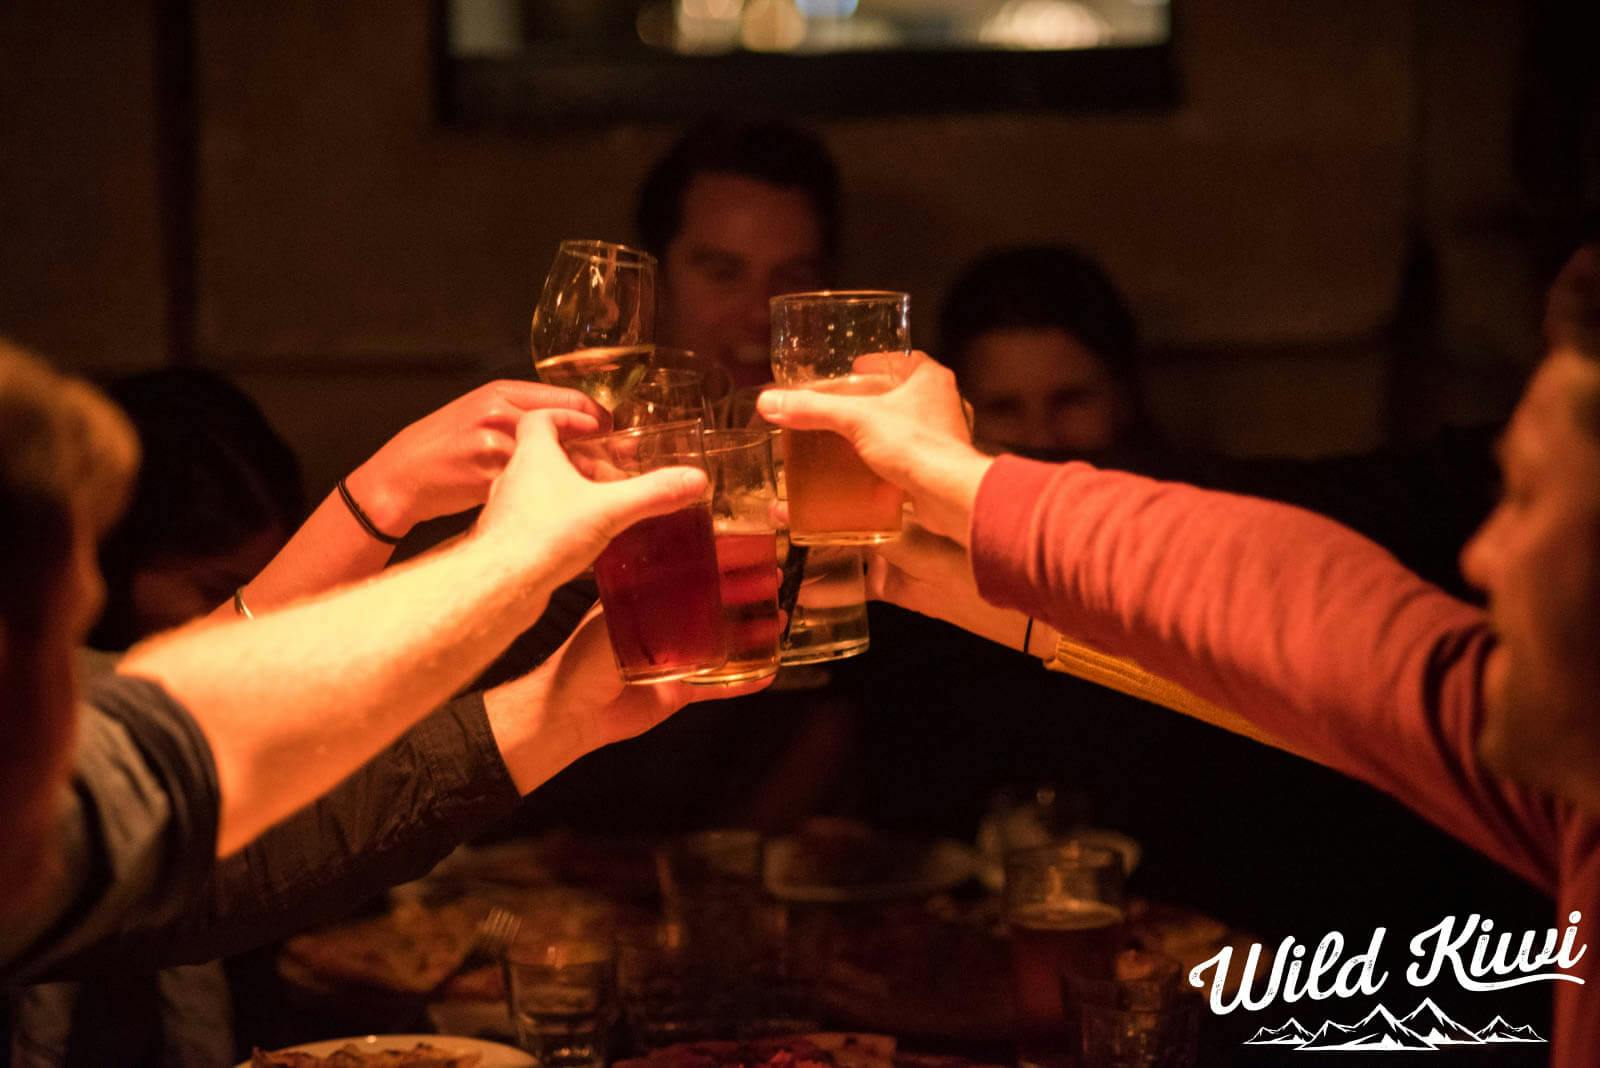 Wild Kiwi tours - Find the hottest night spots in Christchurch